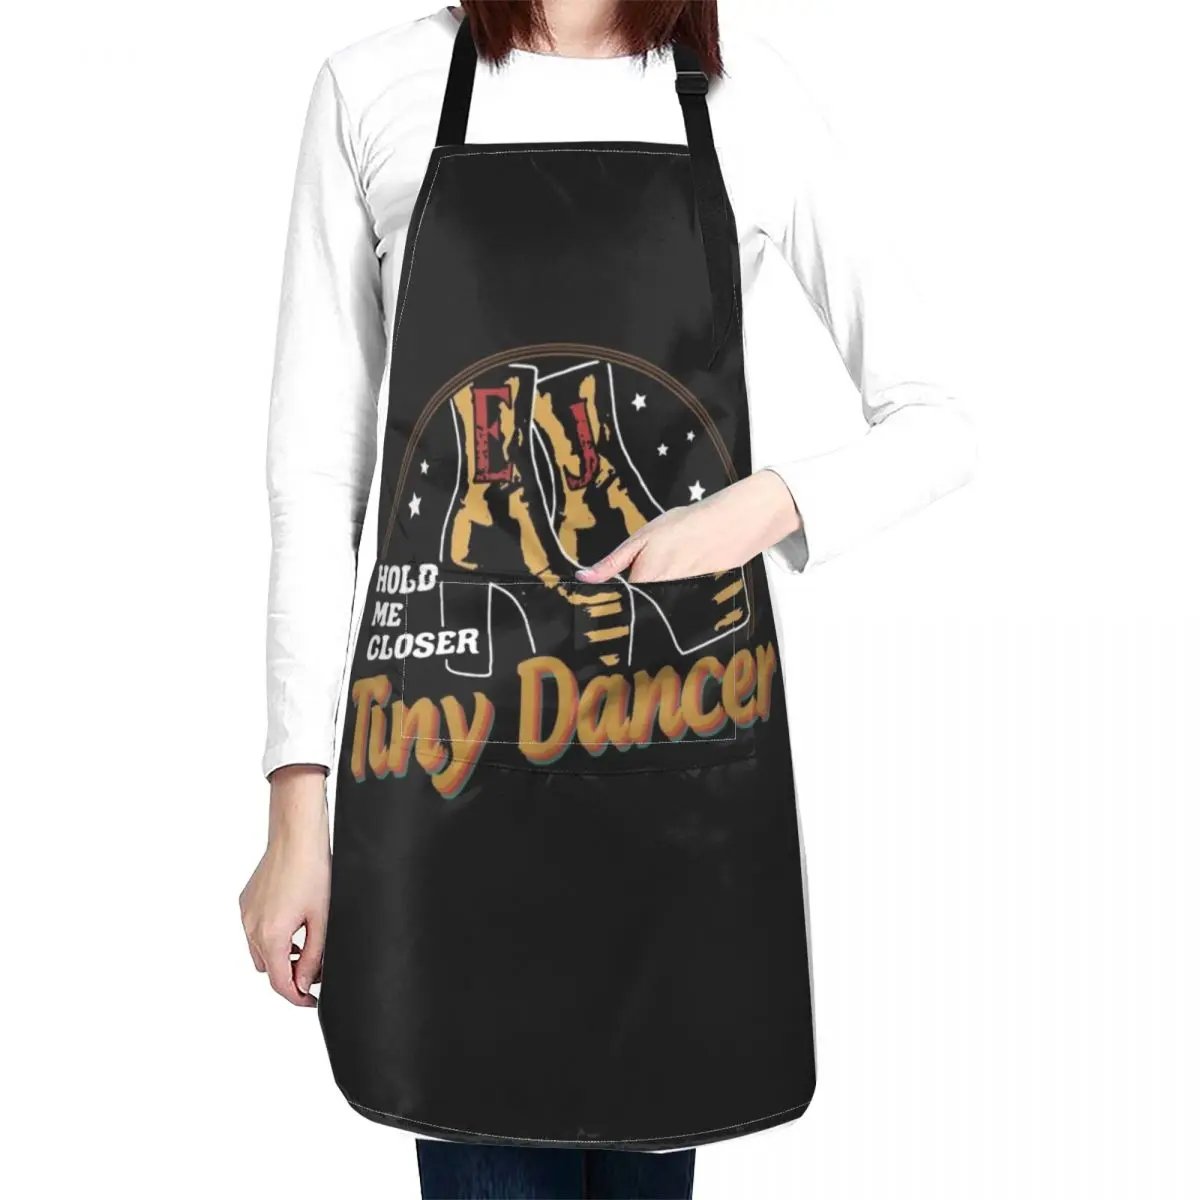 

tiny dancer Farewell elton john gift for fans and lovers Apron Apron Kitchen Novel Kitchen Accessories kitchen item